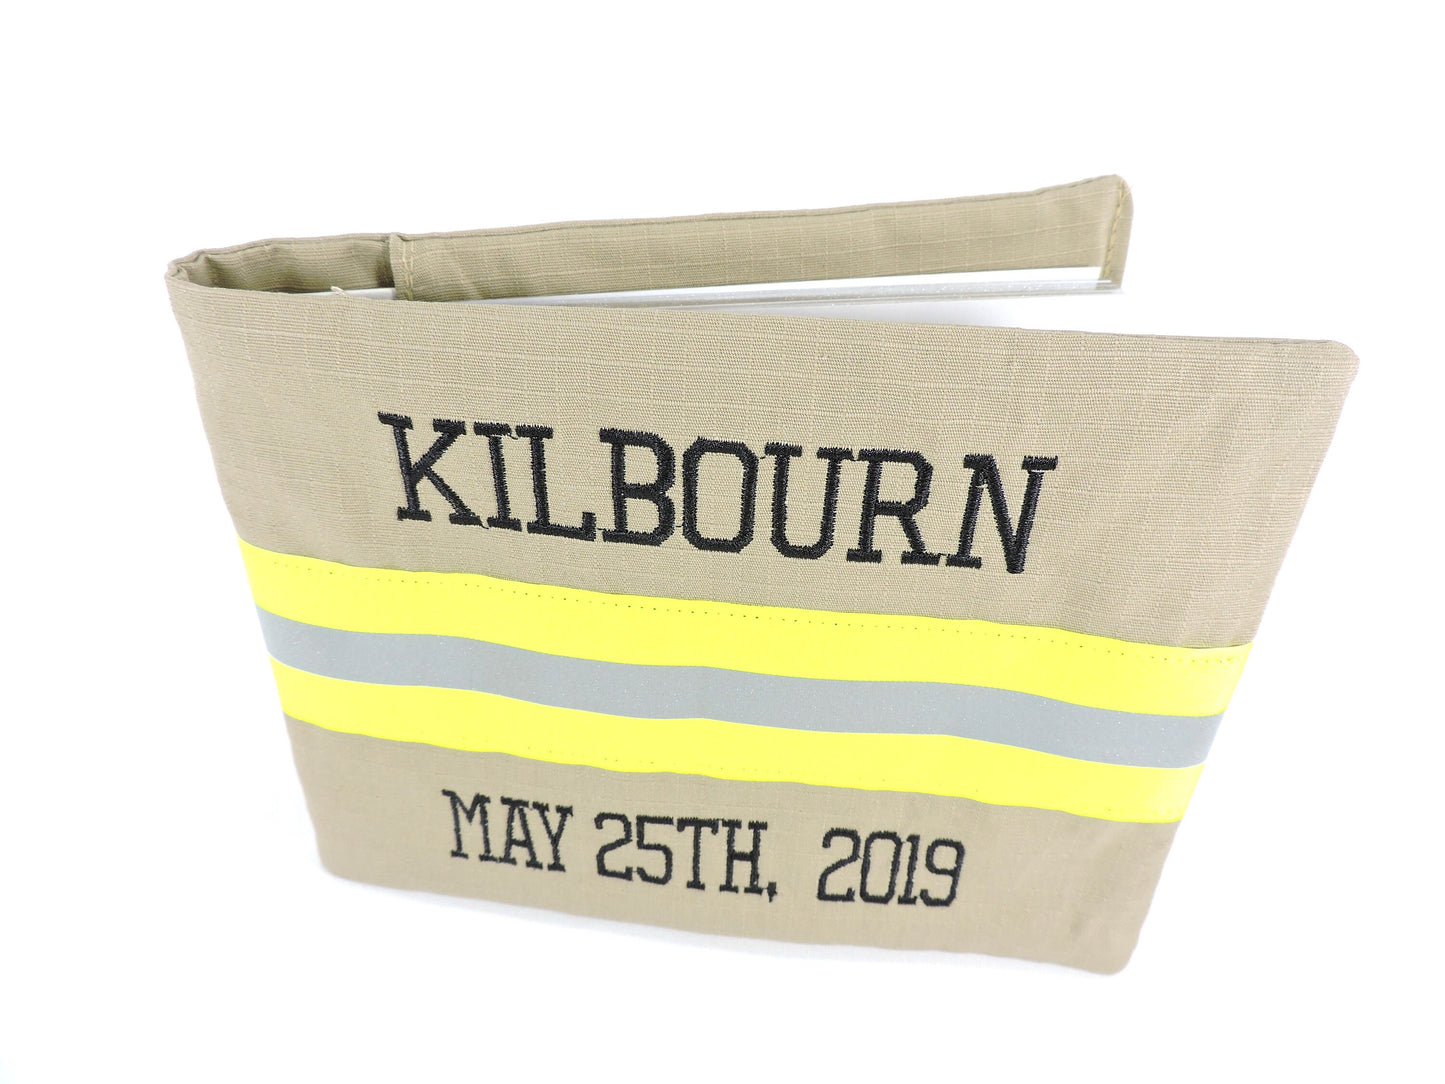 Tan Fabric and Neon Yellow Reflective Tape Firefighter Wedding Guestbook with a name and wedding date added